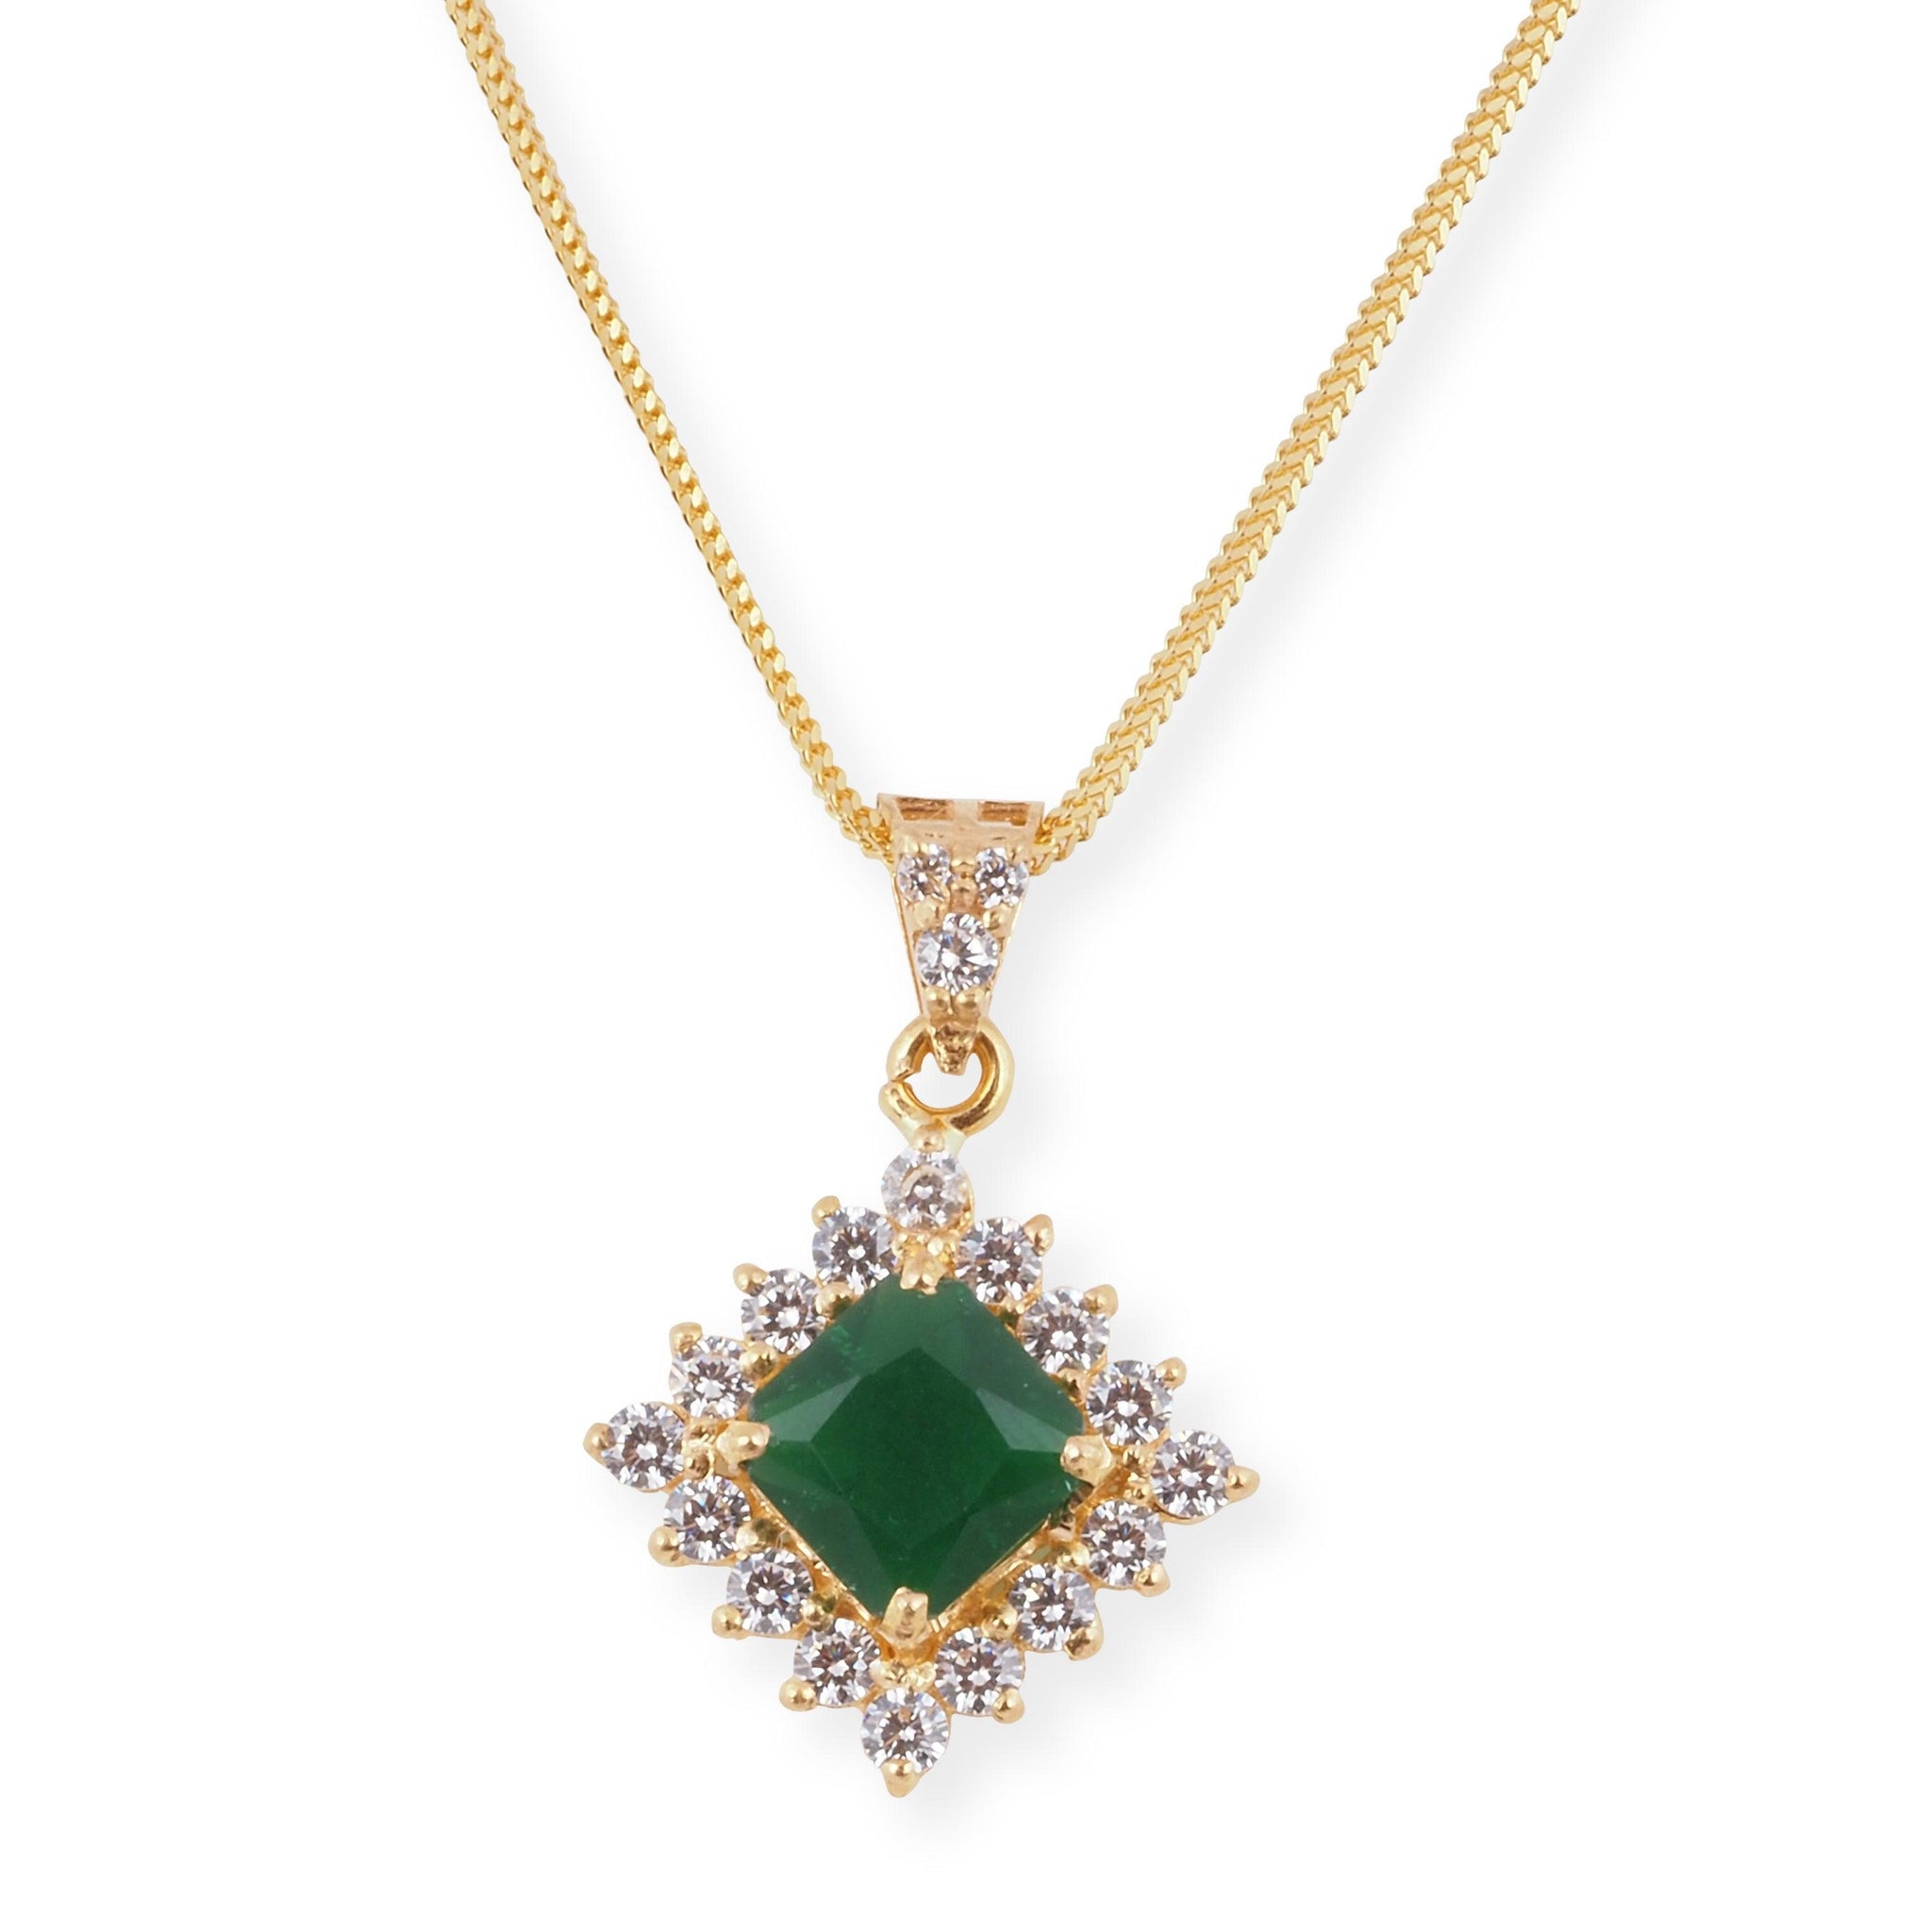 22ct Gold Set with Green and Cubic Zirconia Stones (Pendant + Chain + Earrings) PE-8004